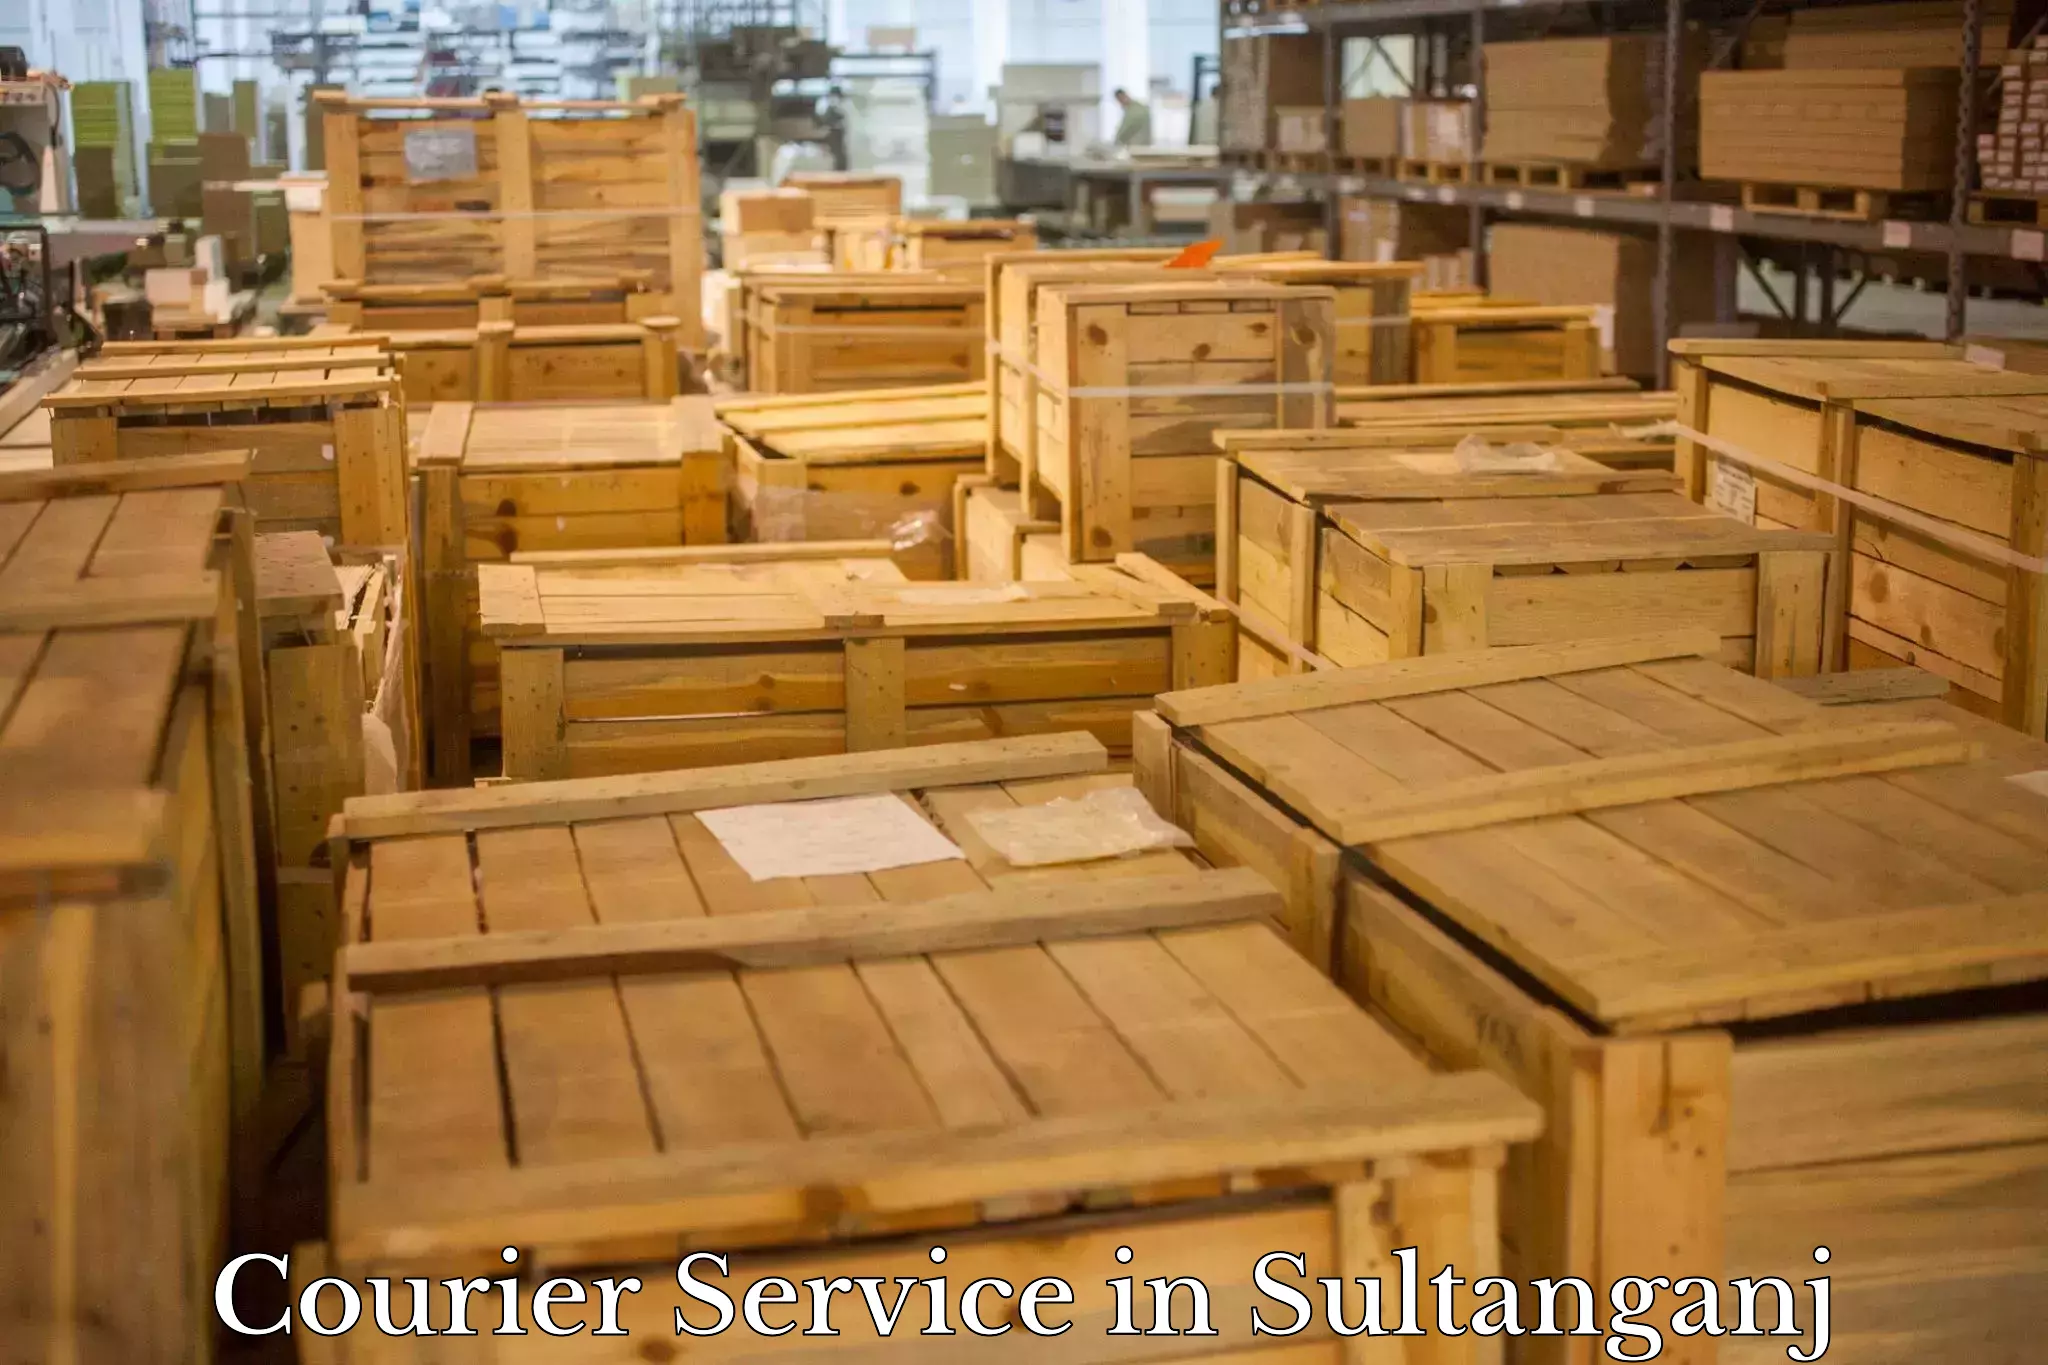 Courier service efficiency in Sultanganj